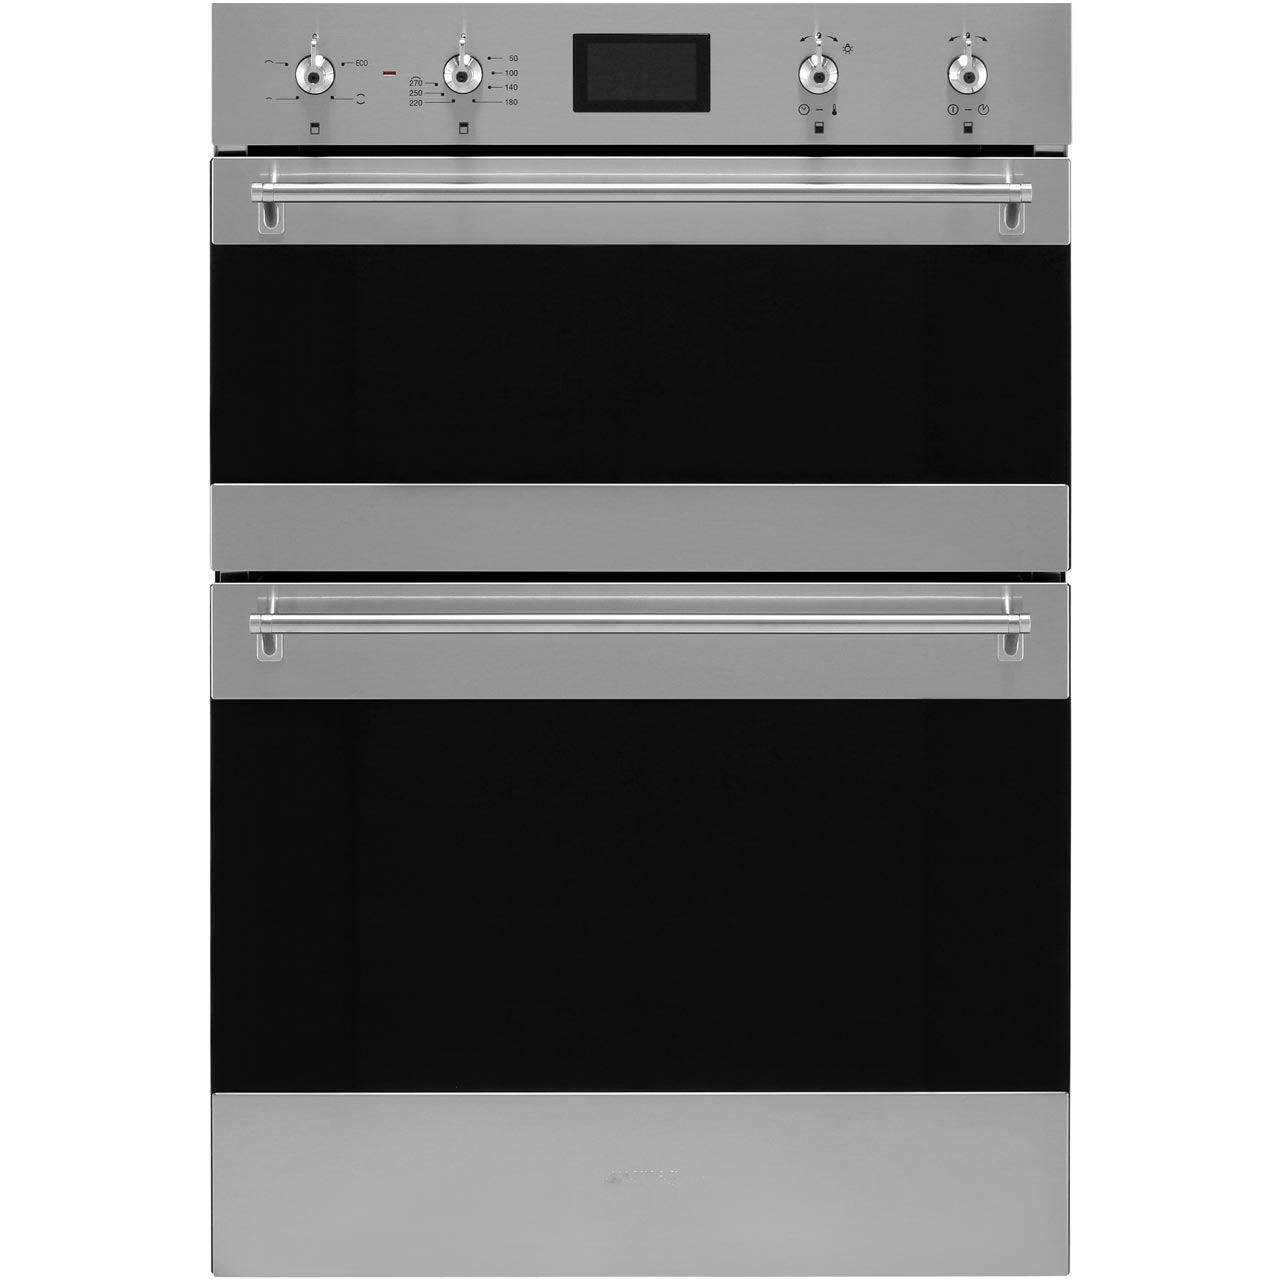 Smeg Classic DOSF6390X Built In Electric Double Oven - Stainless Steel - A/A Rated, Stainless Steel